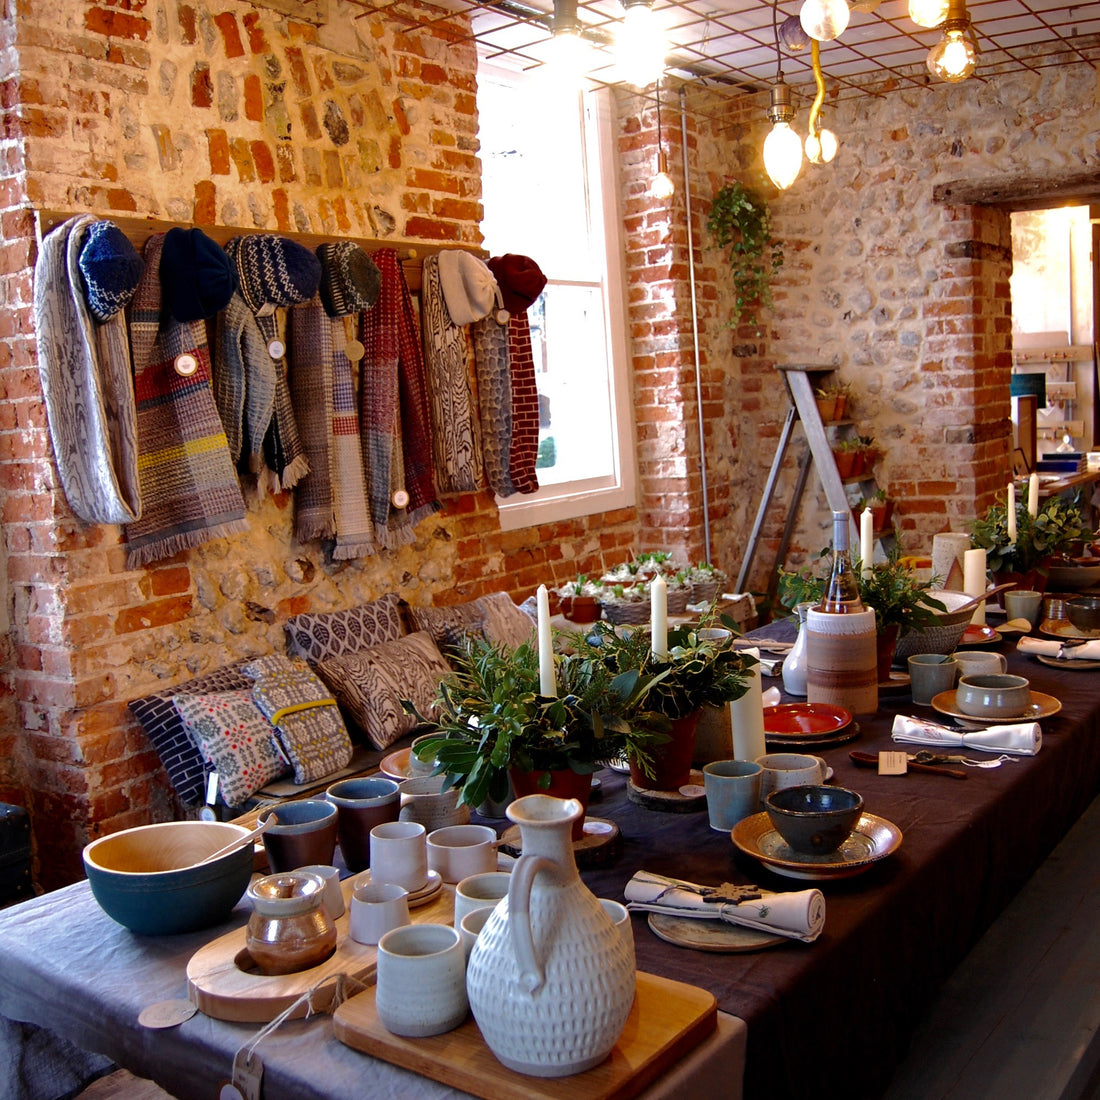 Creating the retail space at Make Holt